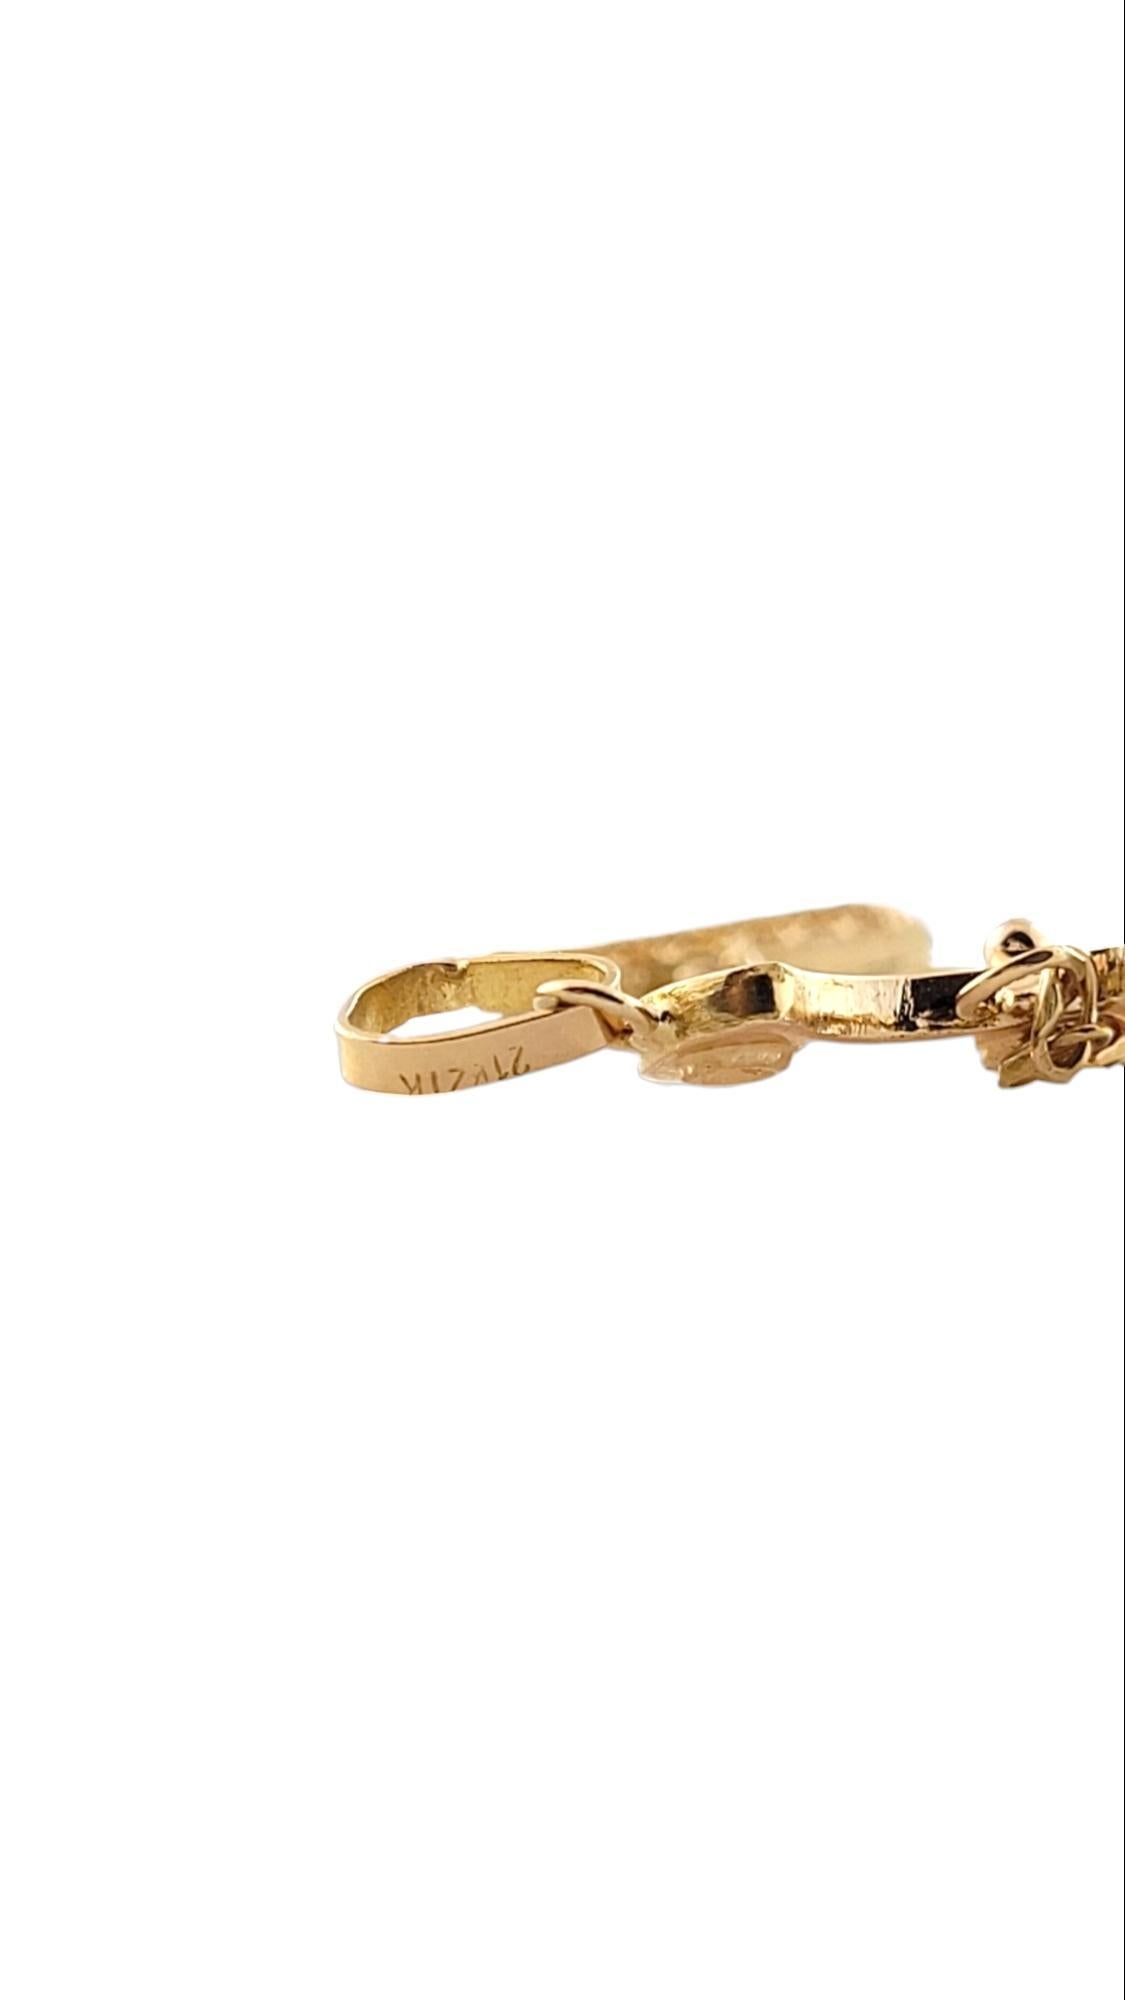 Moveable 21K Yellow Gold Dagger Charm #15814 For Sale 1